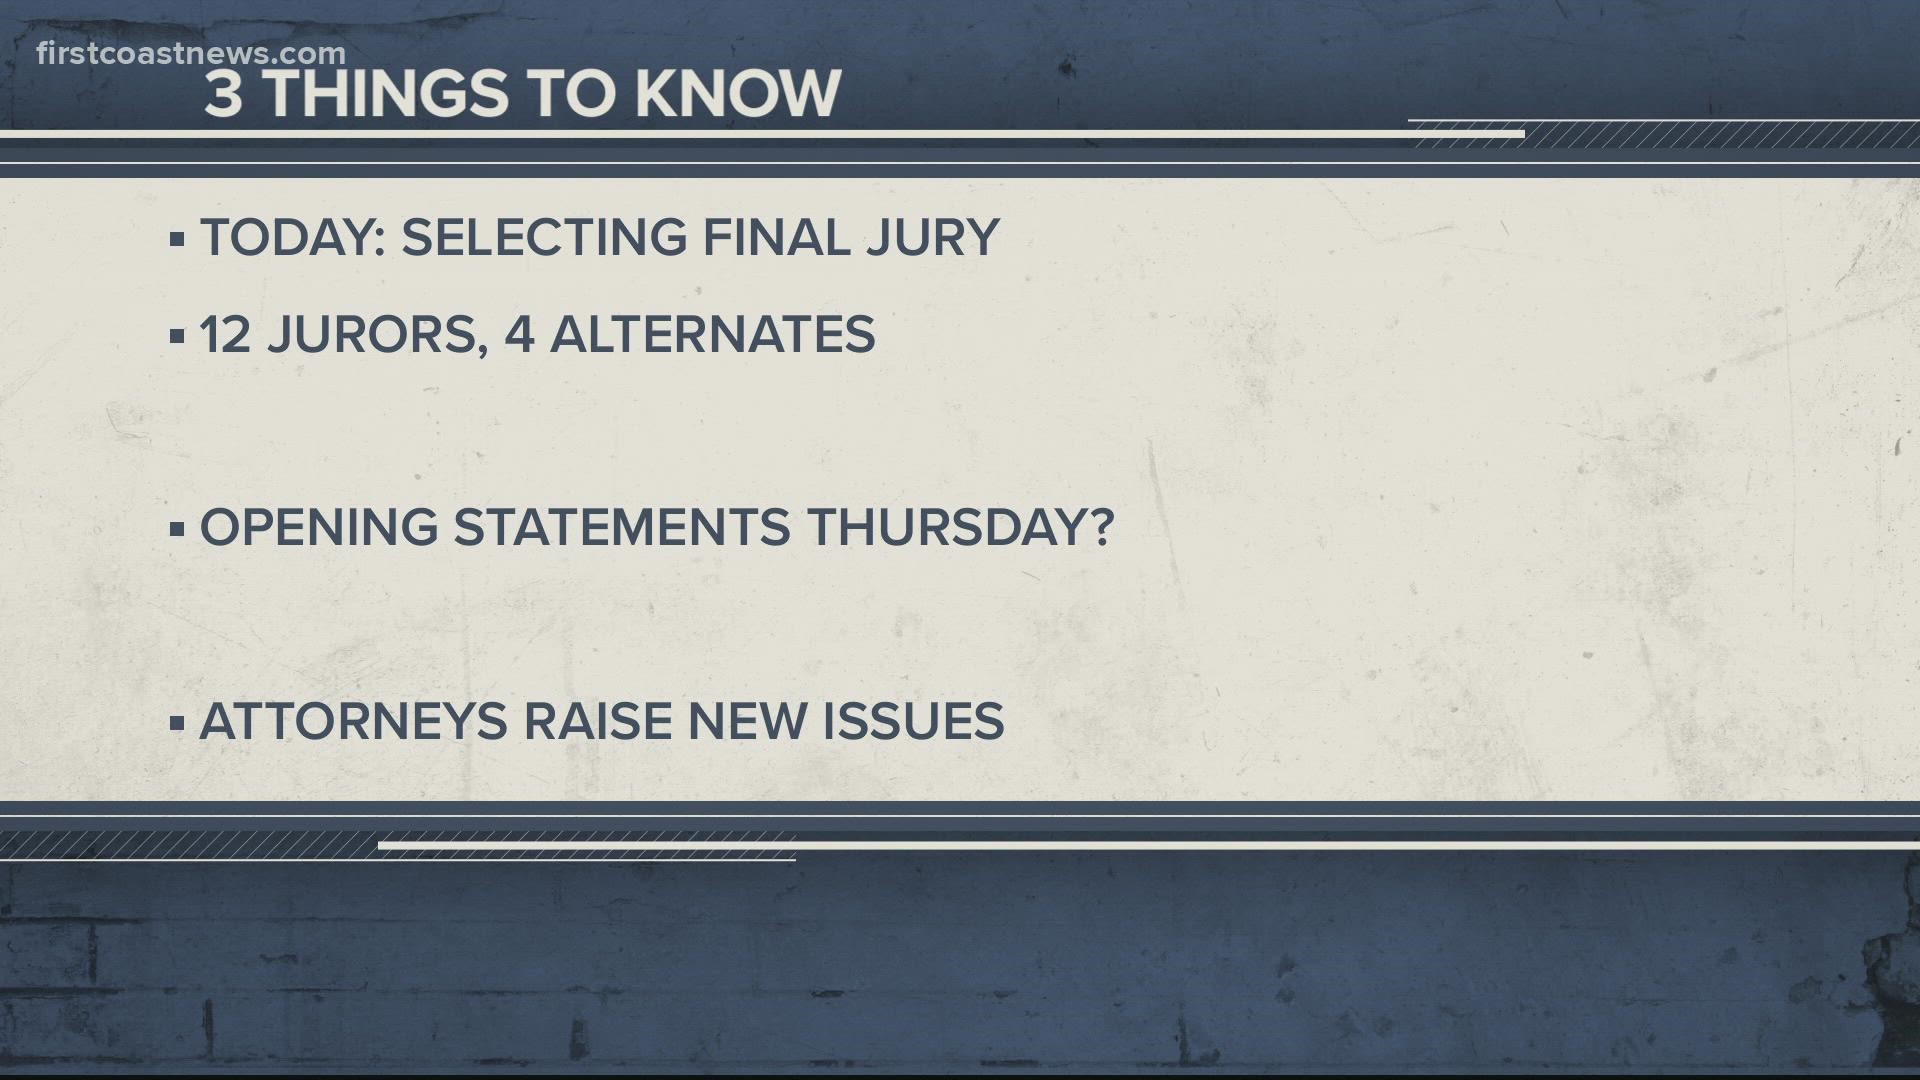 A juror has been struck for cause, and a motion may be filed for a separate trial for Roddy. Here's everything you need to know on Day 12.